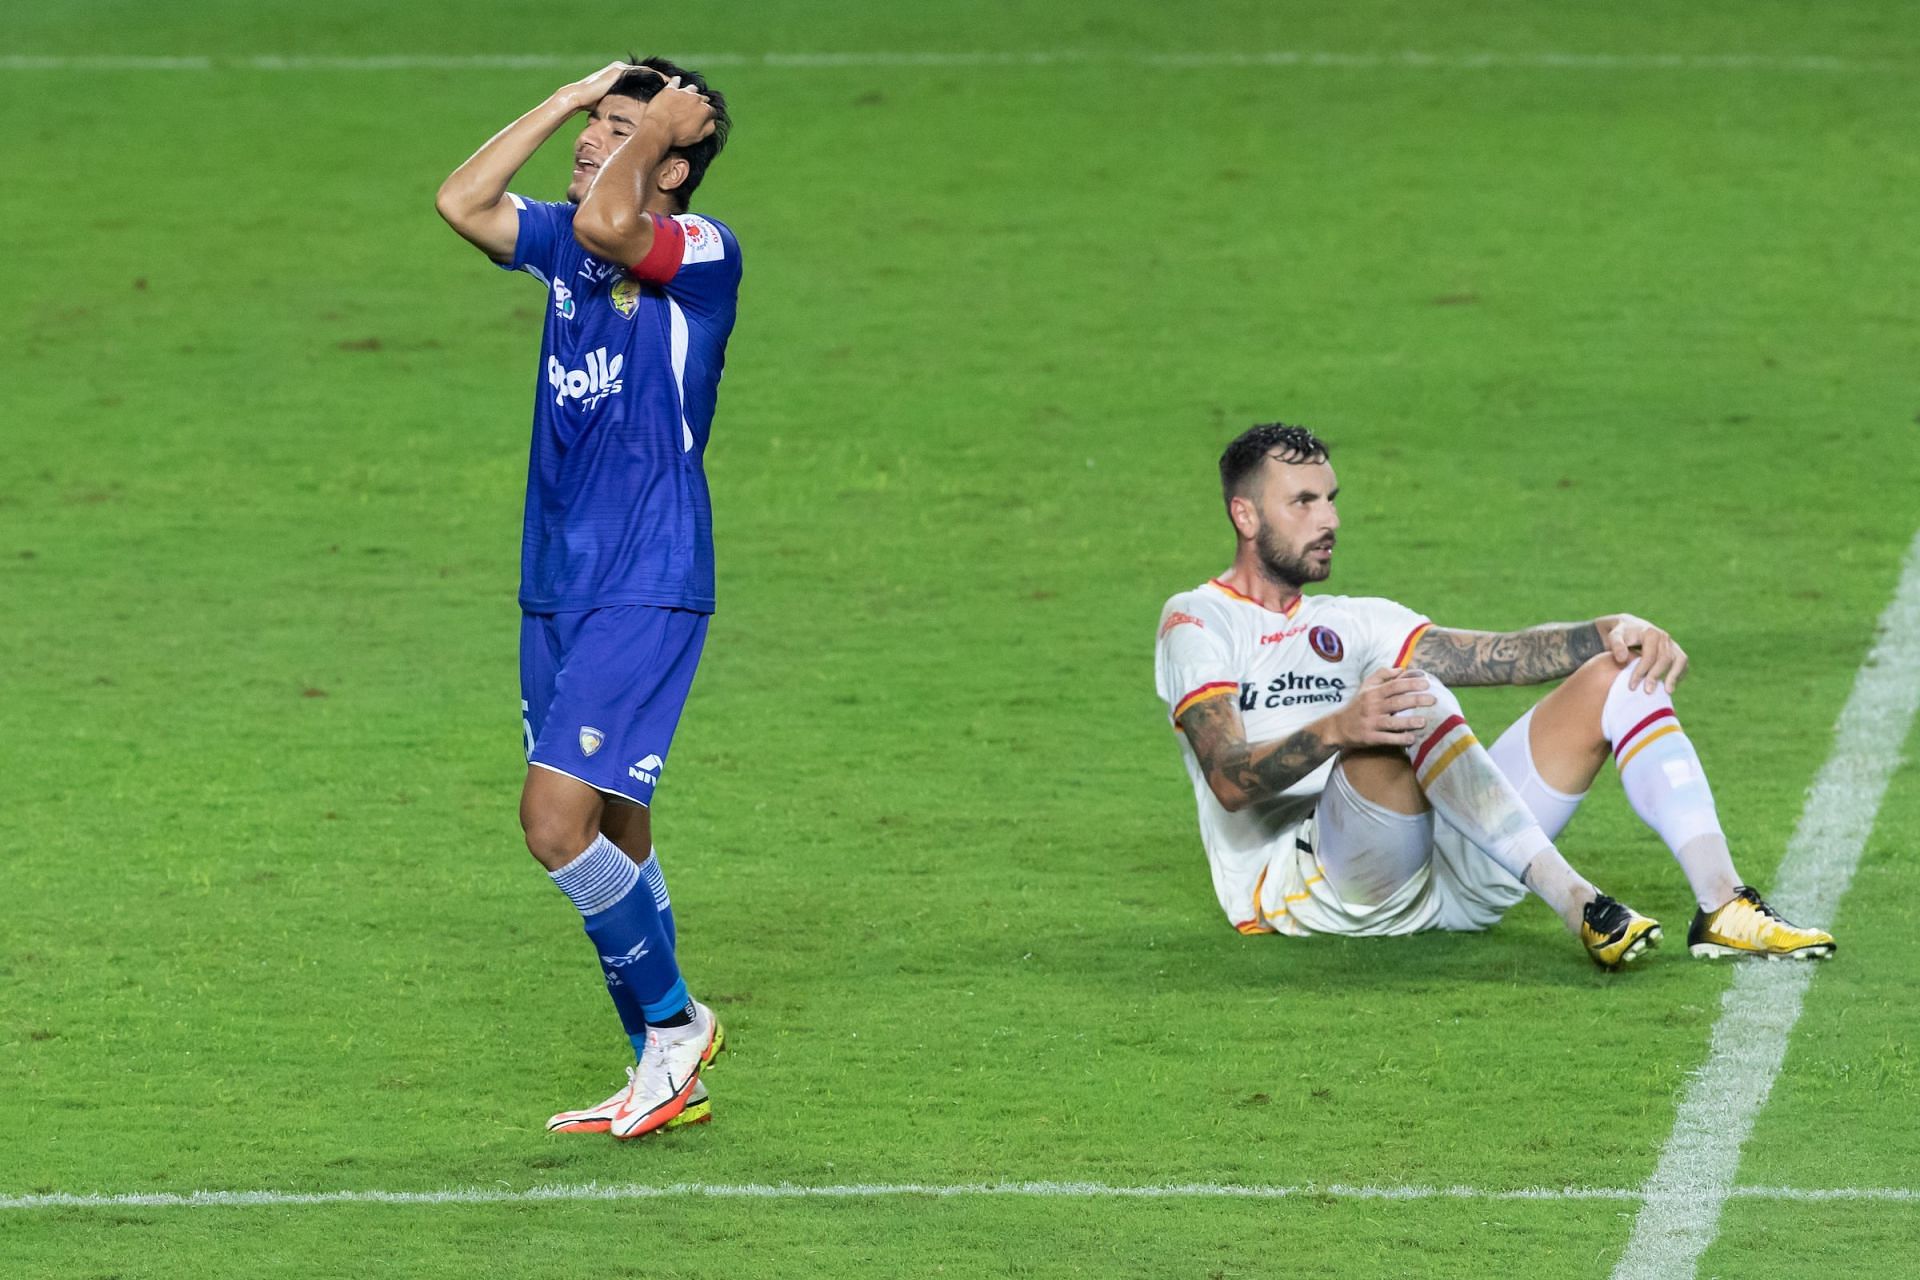 Chennaiyin FC have had a series of disappointments they will want to go beyond in their next encounter (Image Courtesy: ISL)